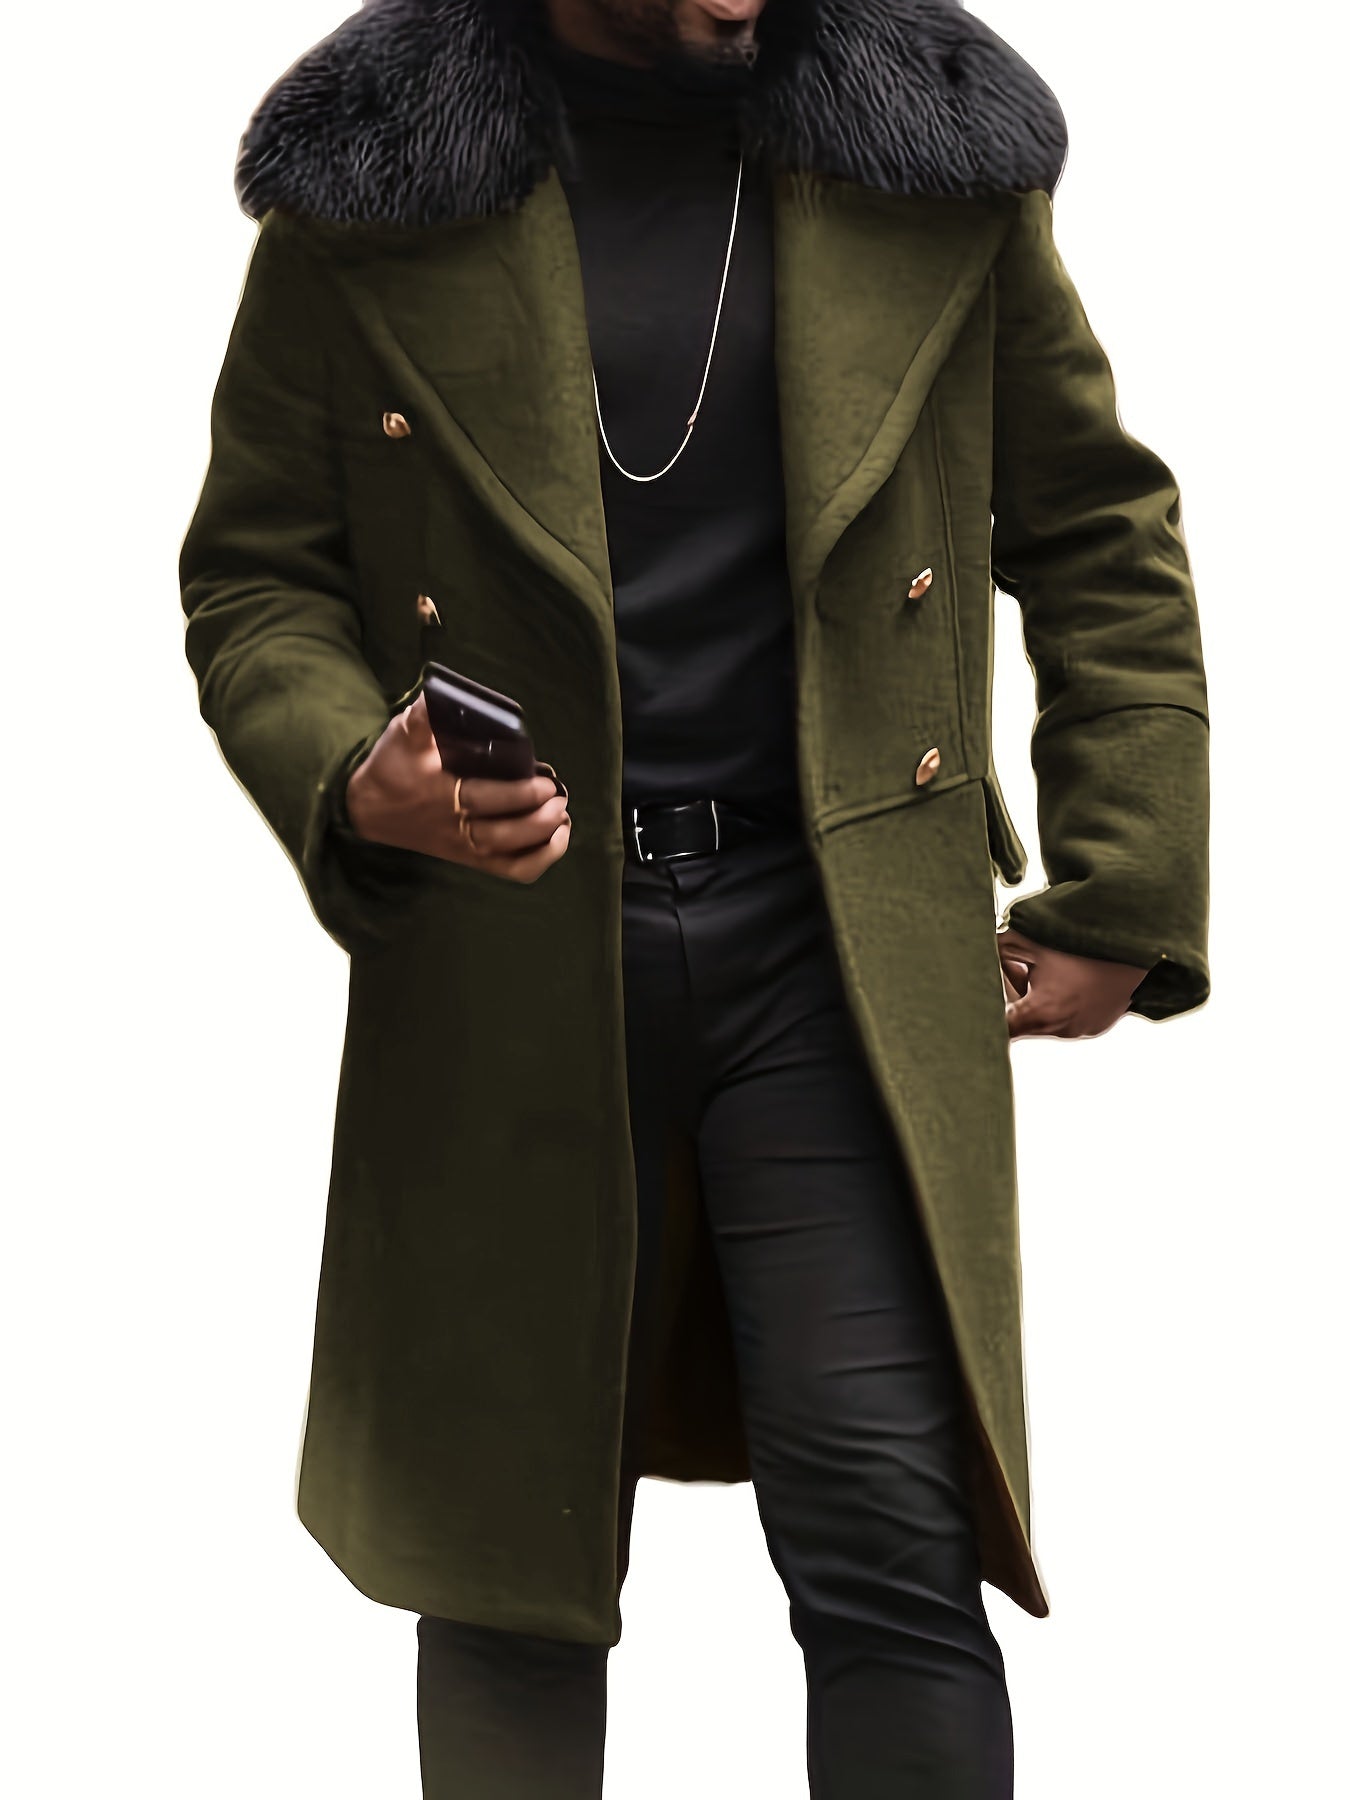 Foruwish - Men's Warm Double Breasted Overcoat, Casual Elegant Faux Woolen Trench Coat For Fall Winter